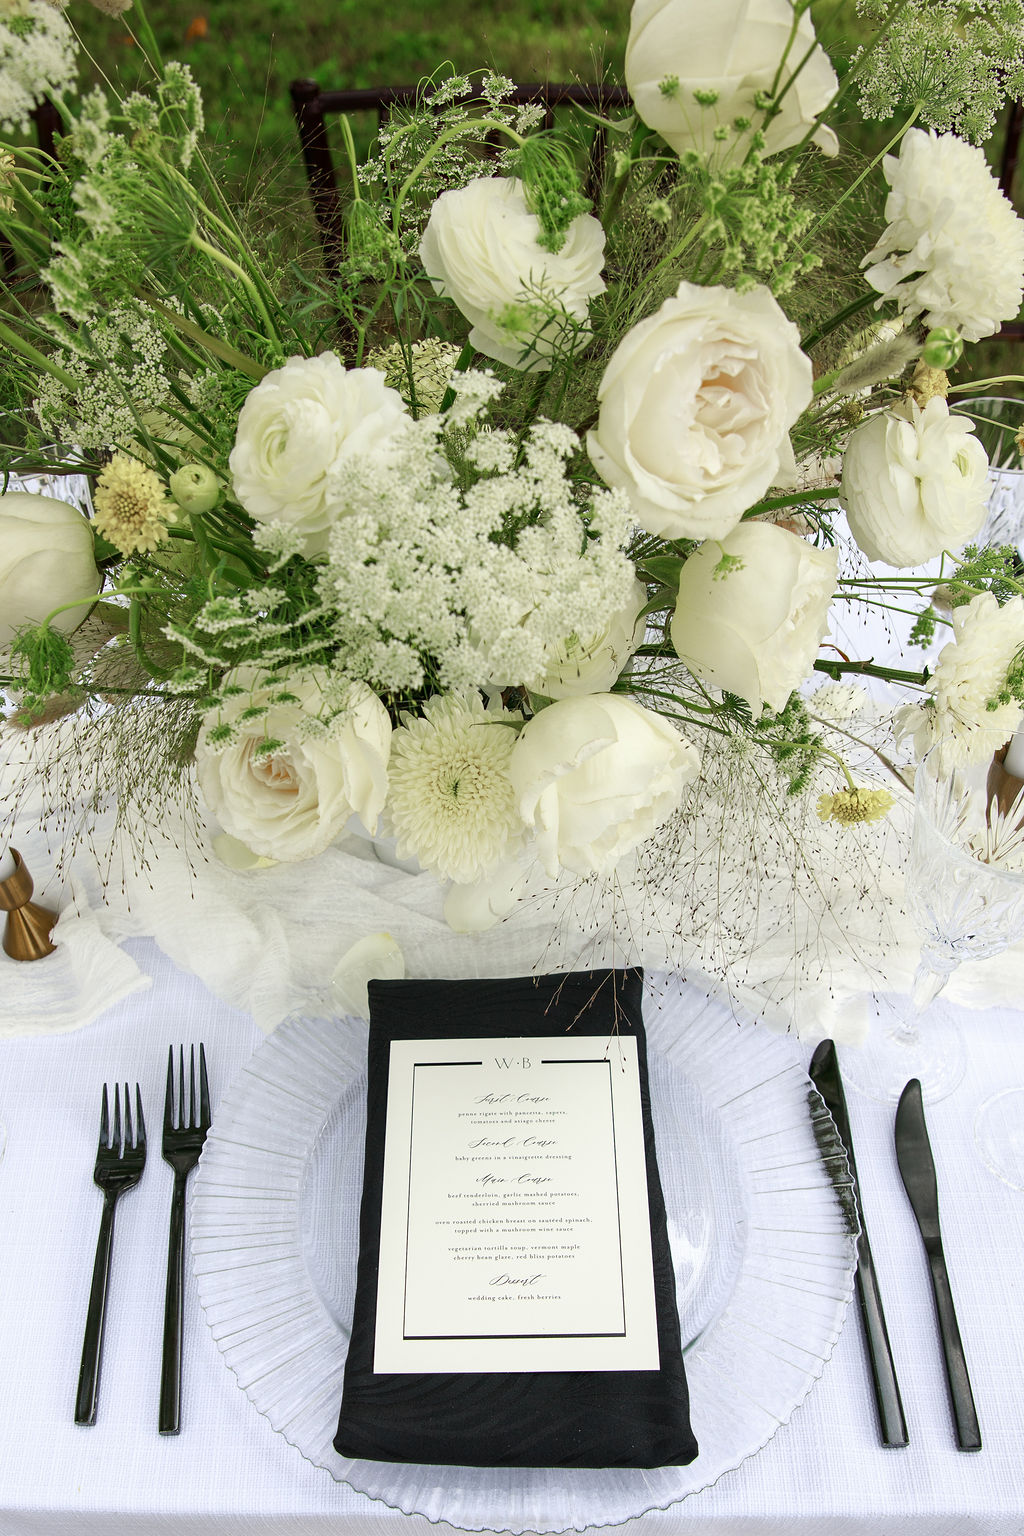 Details of a wedding reception table setting with white centerpiece